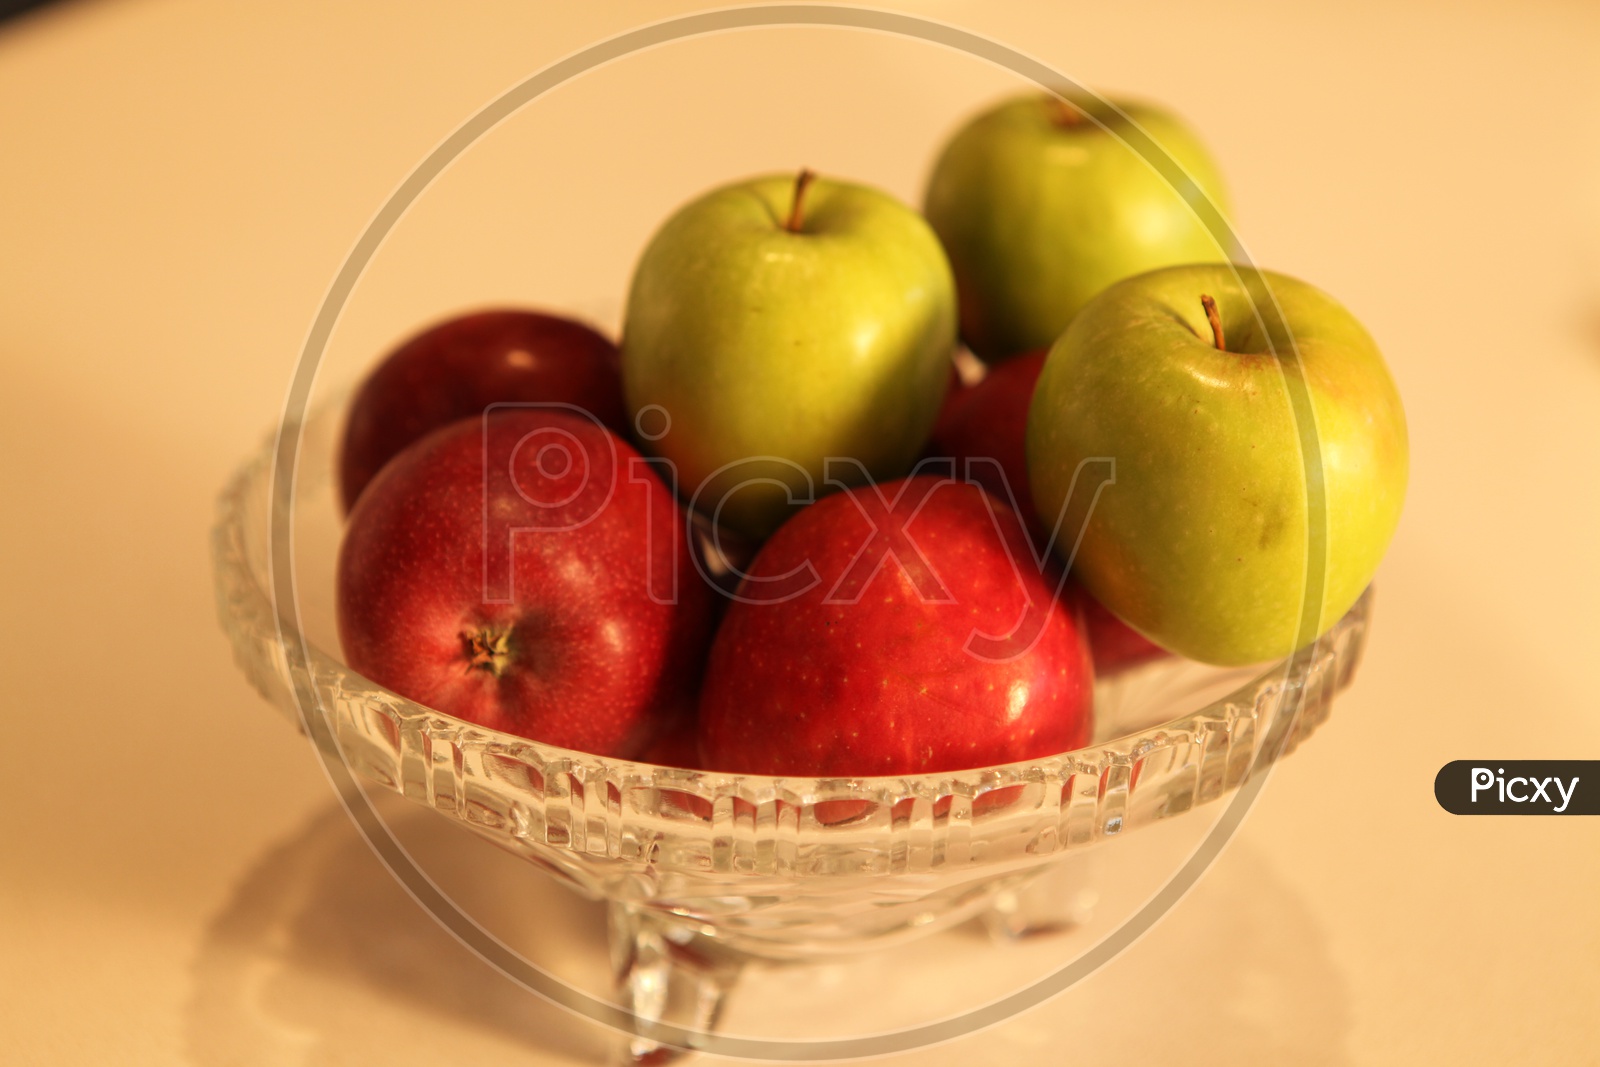 Photograph of green and red apples in a bowl